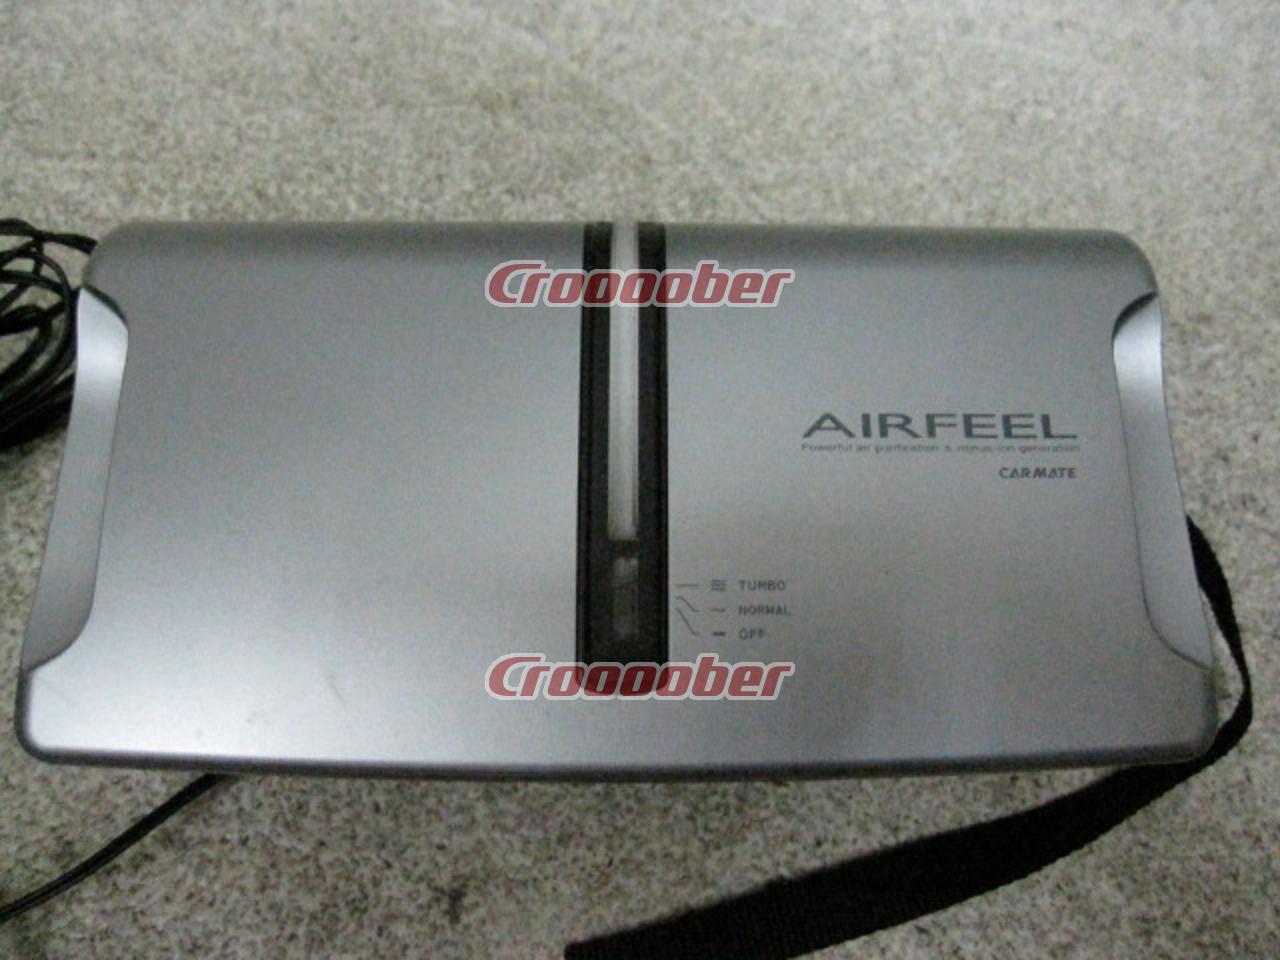 Campaign Special Price! CAR-MATE Carmate AIRFEEL 1/26 Was Price